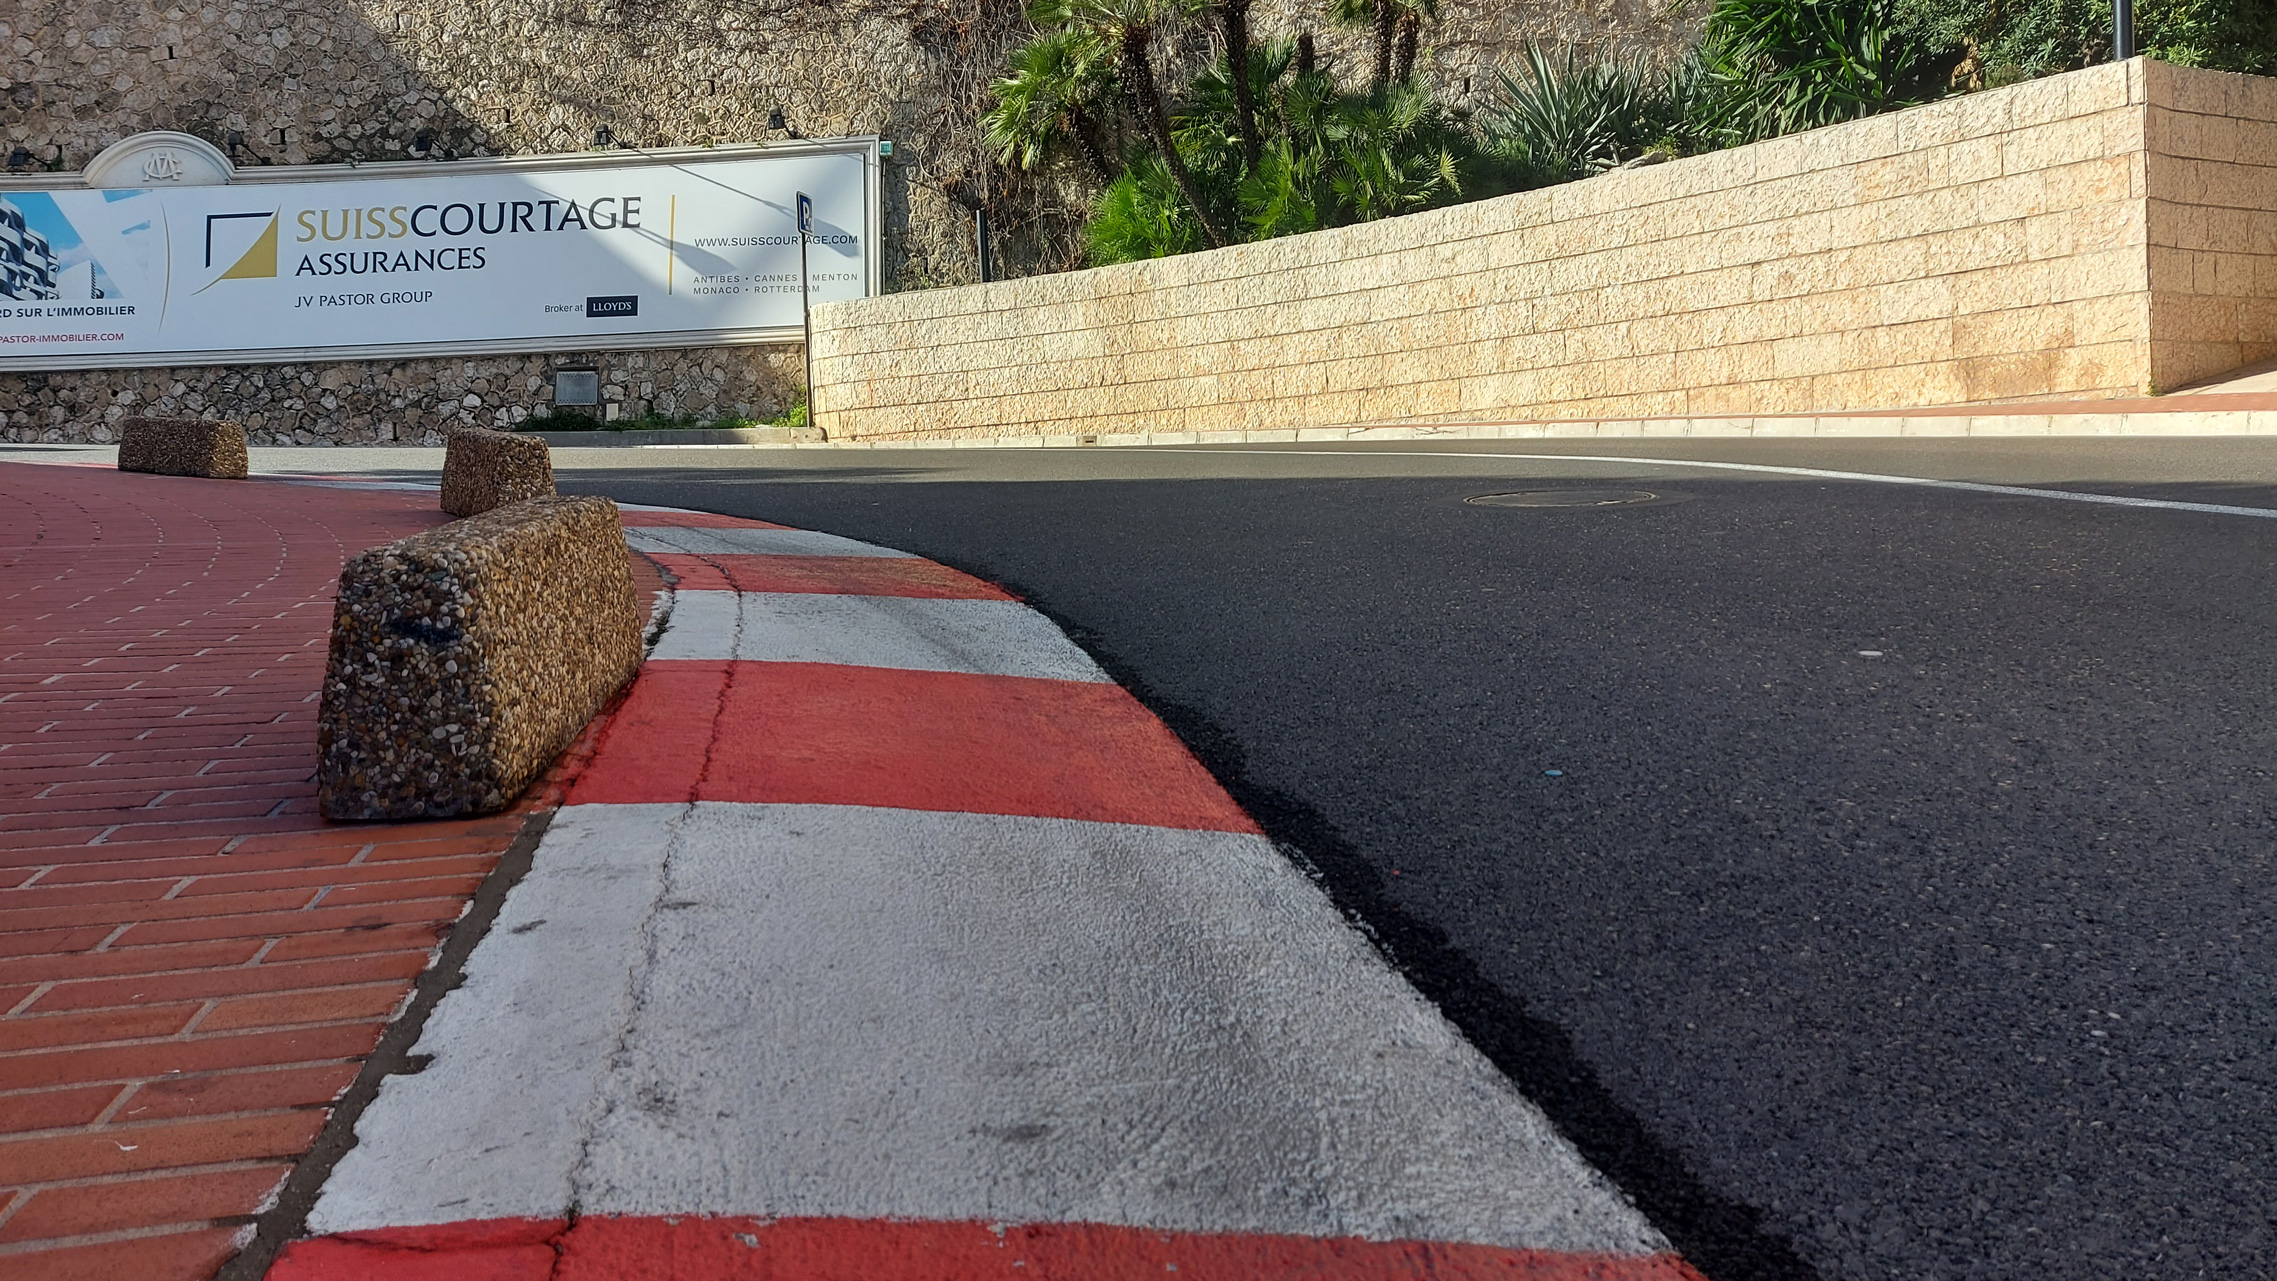 monaco gp: what does the track look like normally?